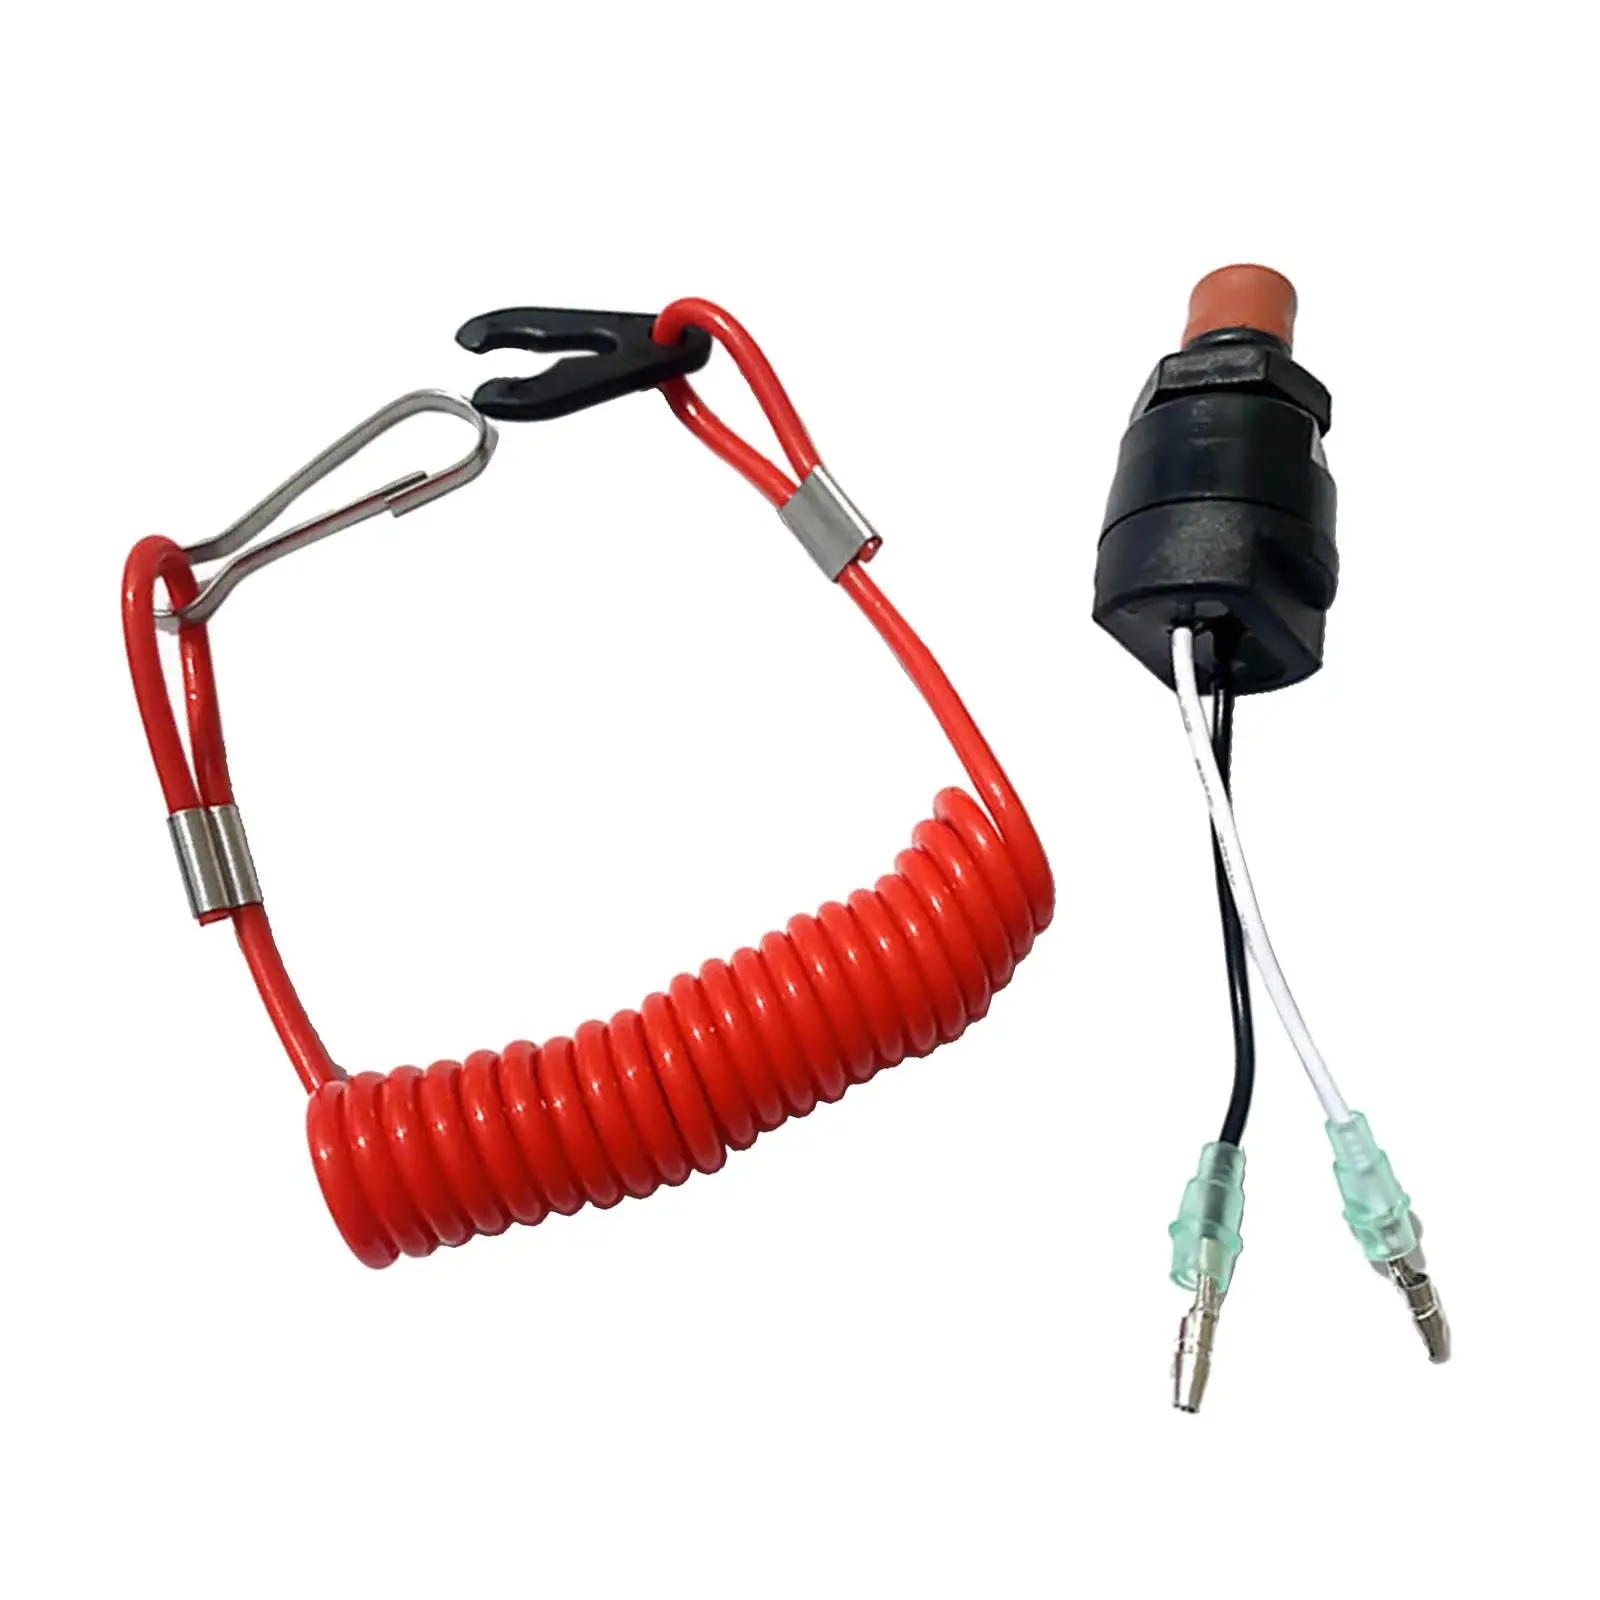 Boat Outboard Engine Motor Emergency Kill Stop Switch Motor Stop Switch for Honda Outboard Motors Bike Connector Cord Red